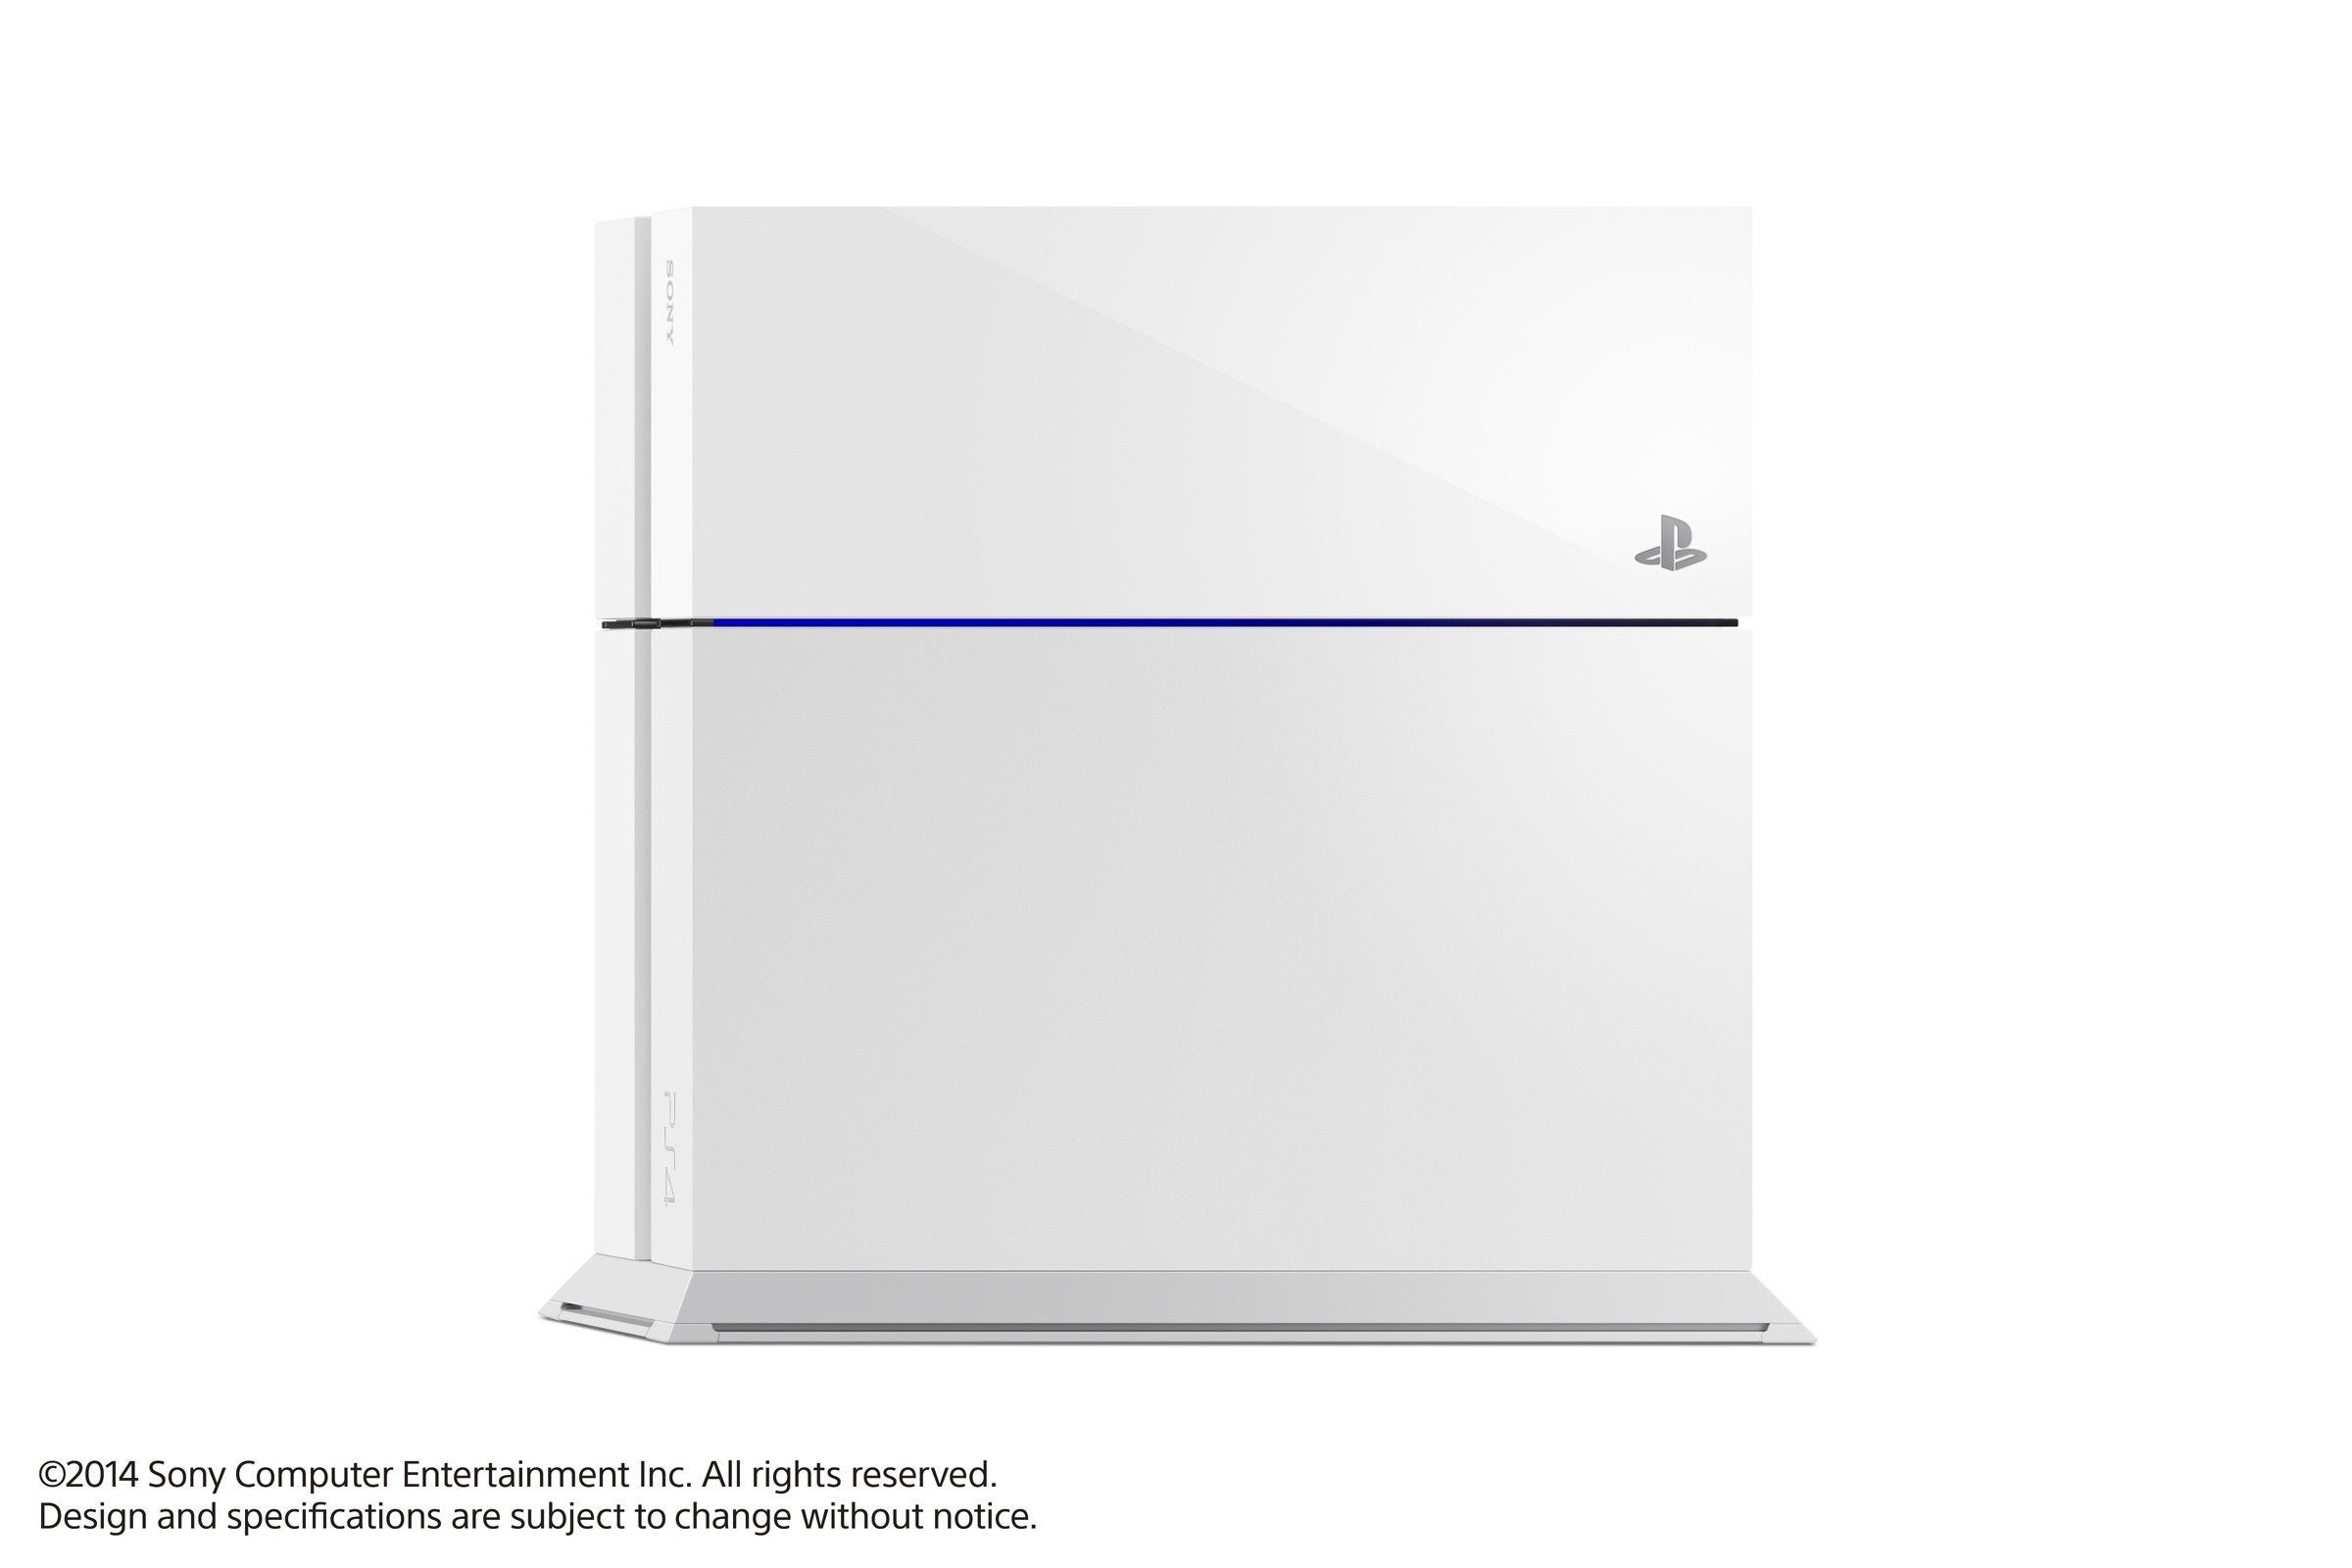 all white ps4